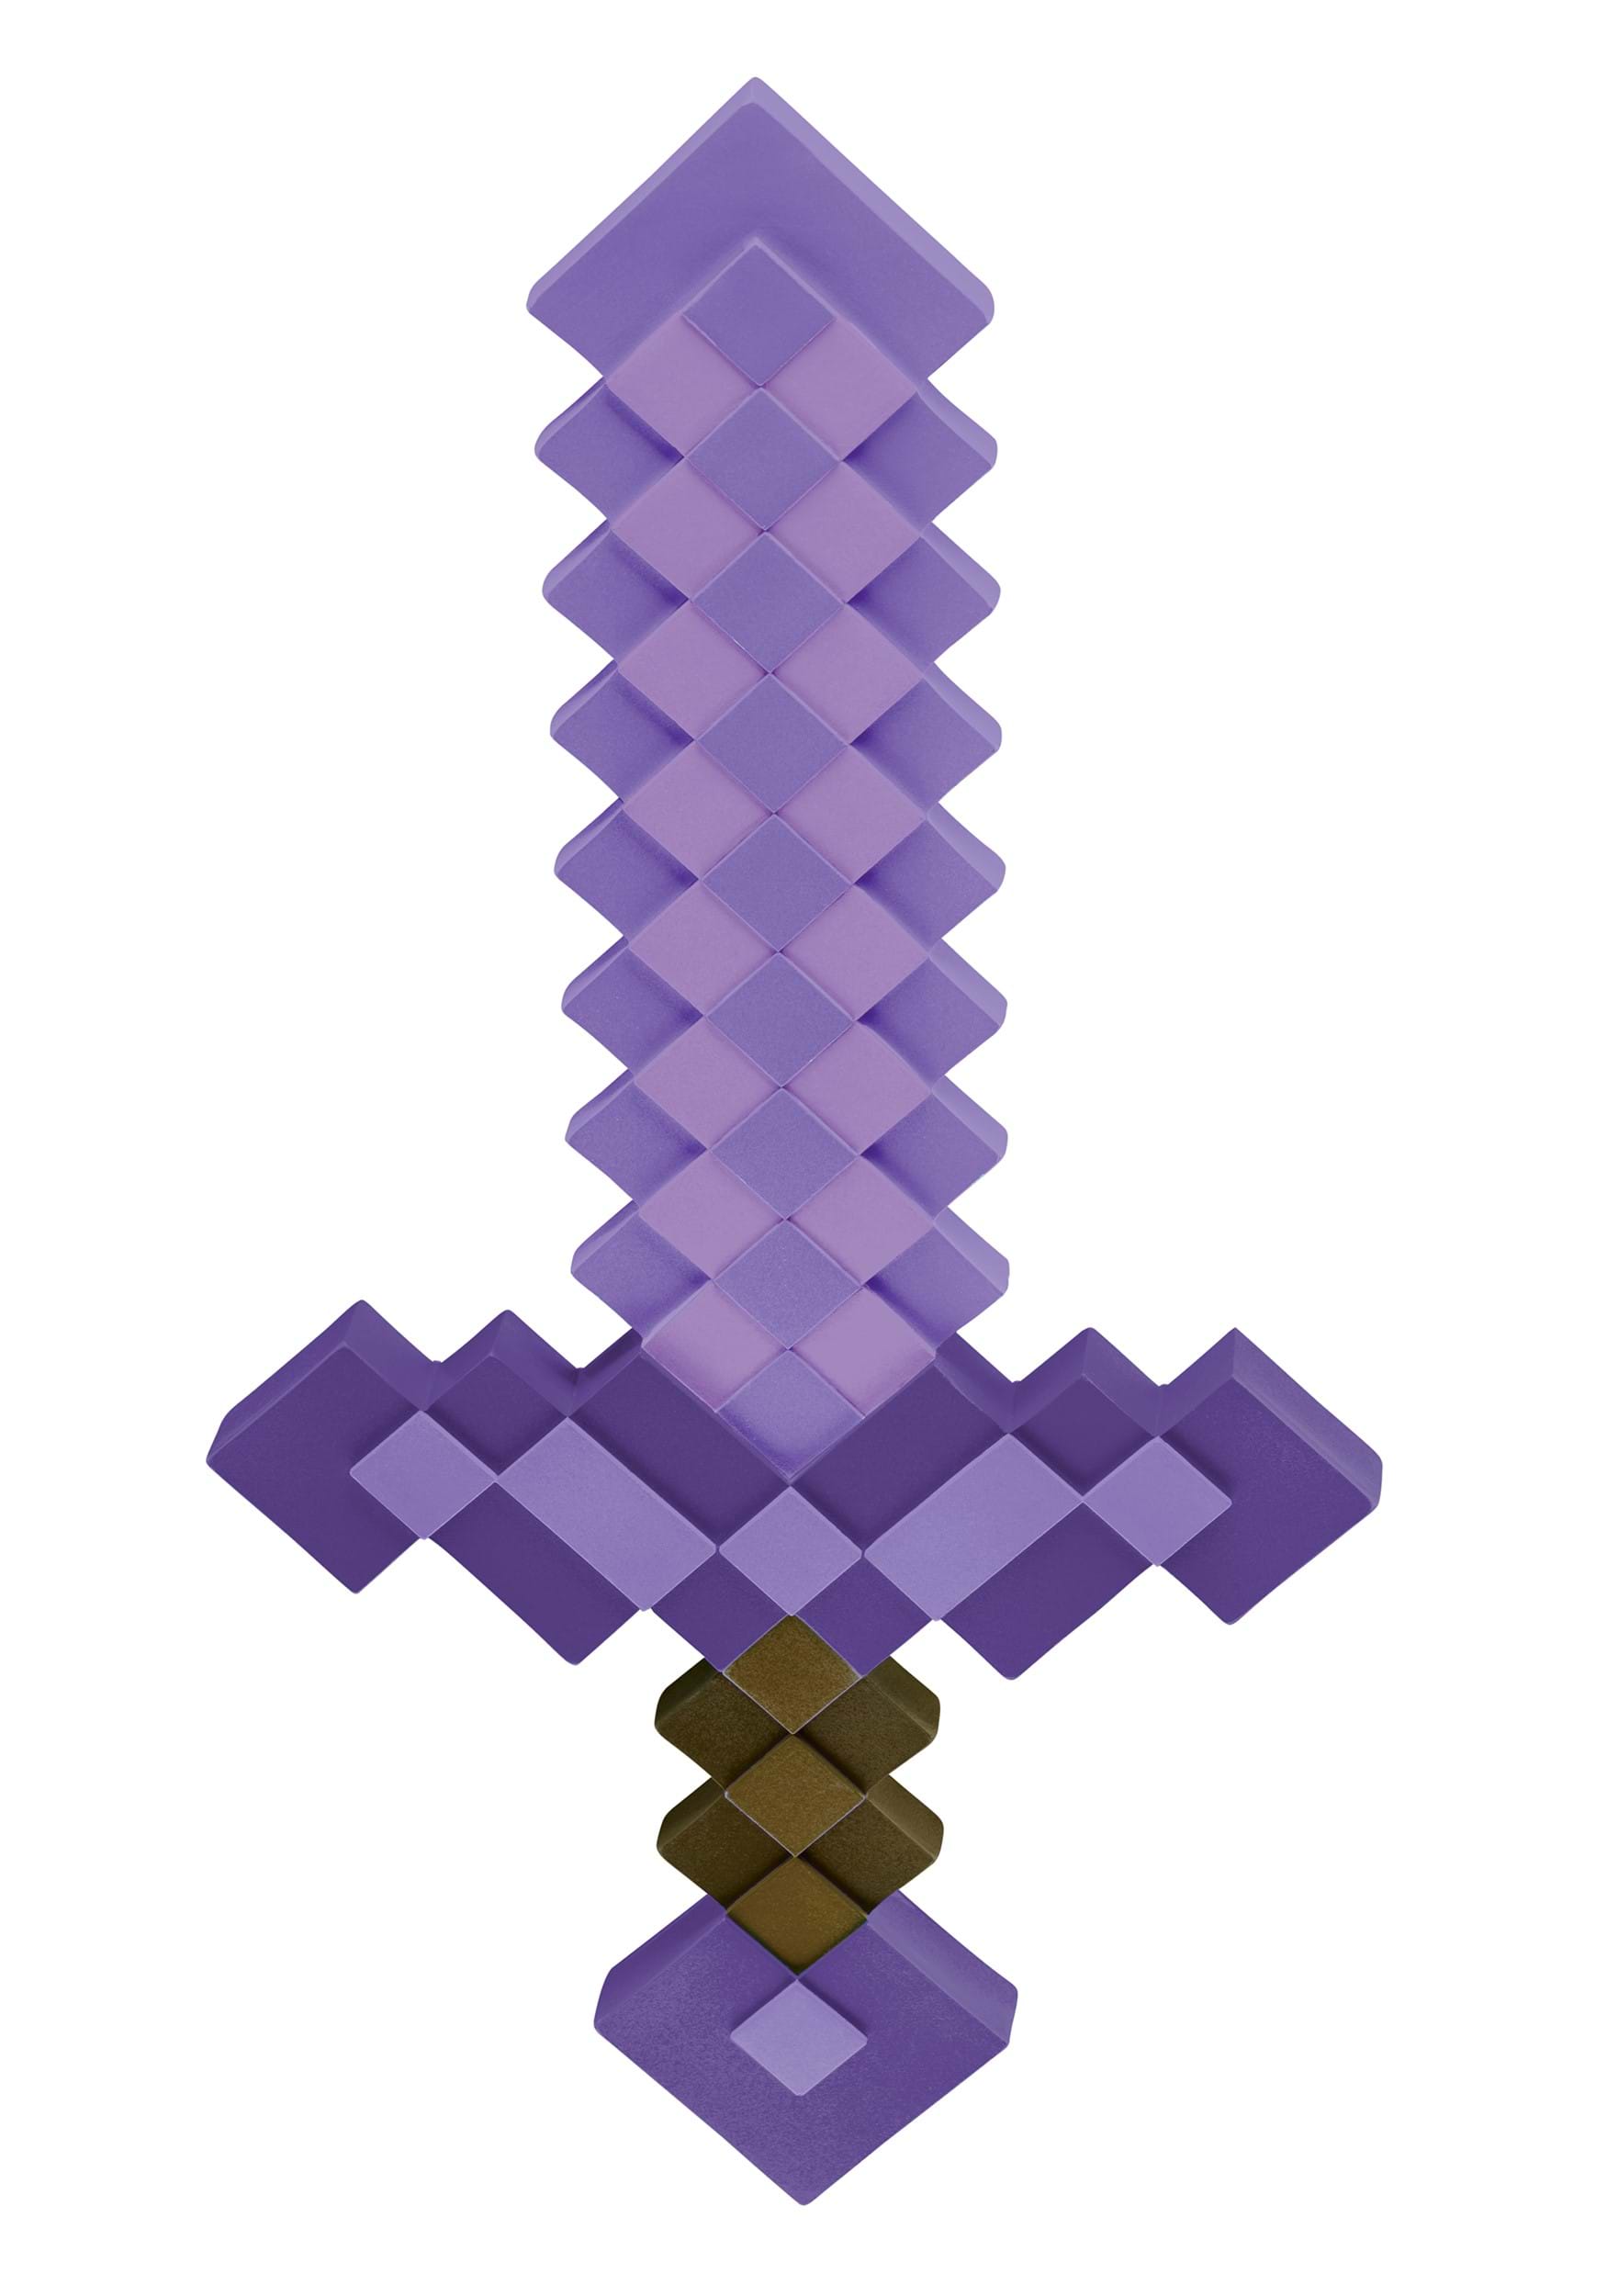 https://images.fun.com/products/66134/1-1/minecraft-enchanted-purple-sword.jpg